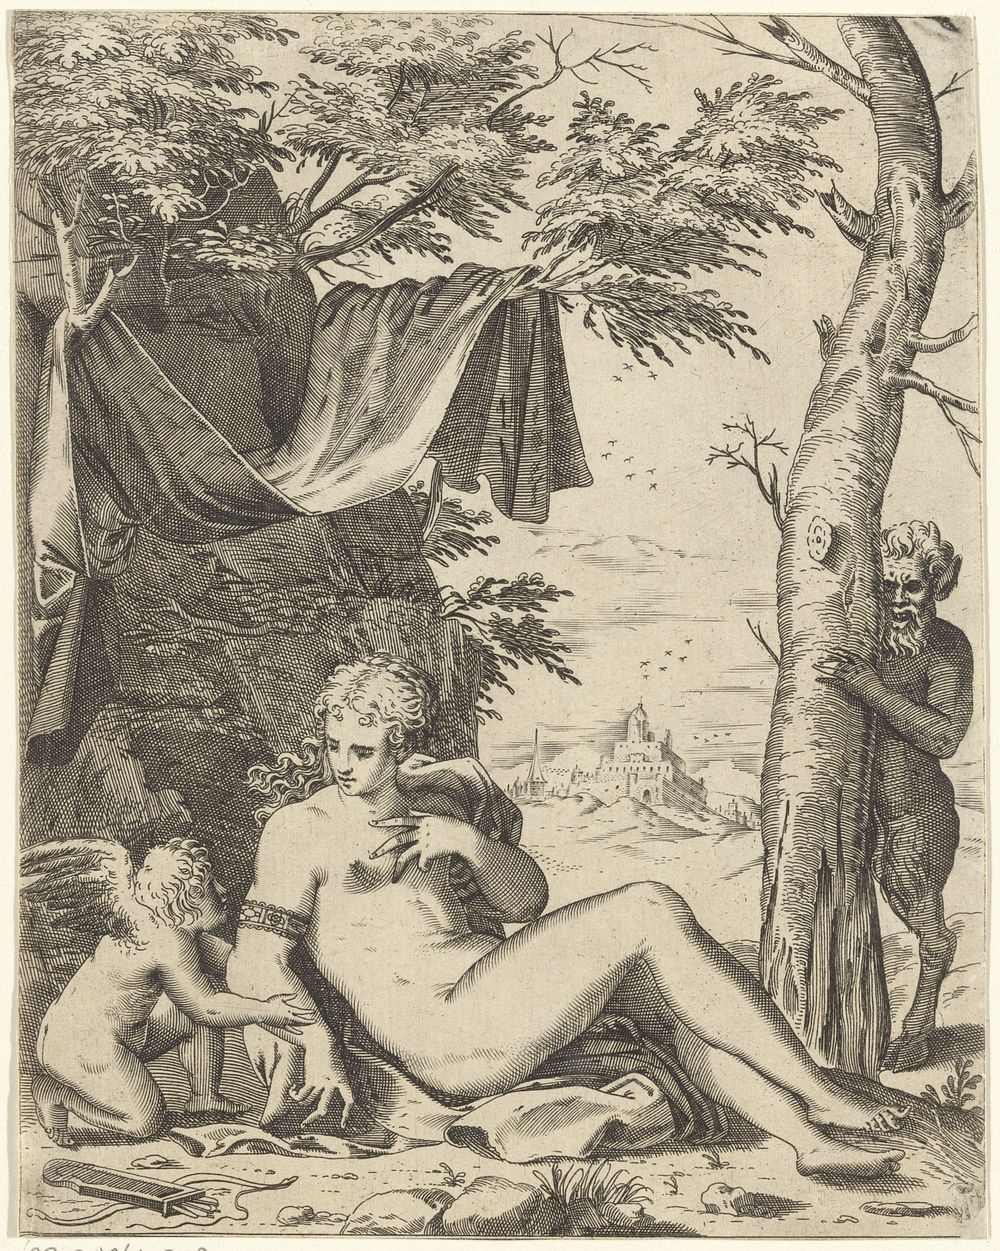 Venus, Amor en sater (1567 - 1602) by Agostino Carracci and anonymous